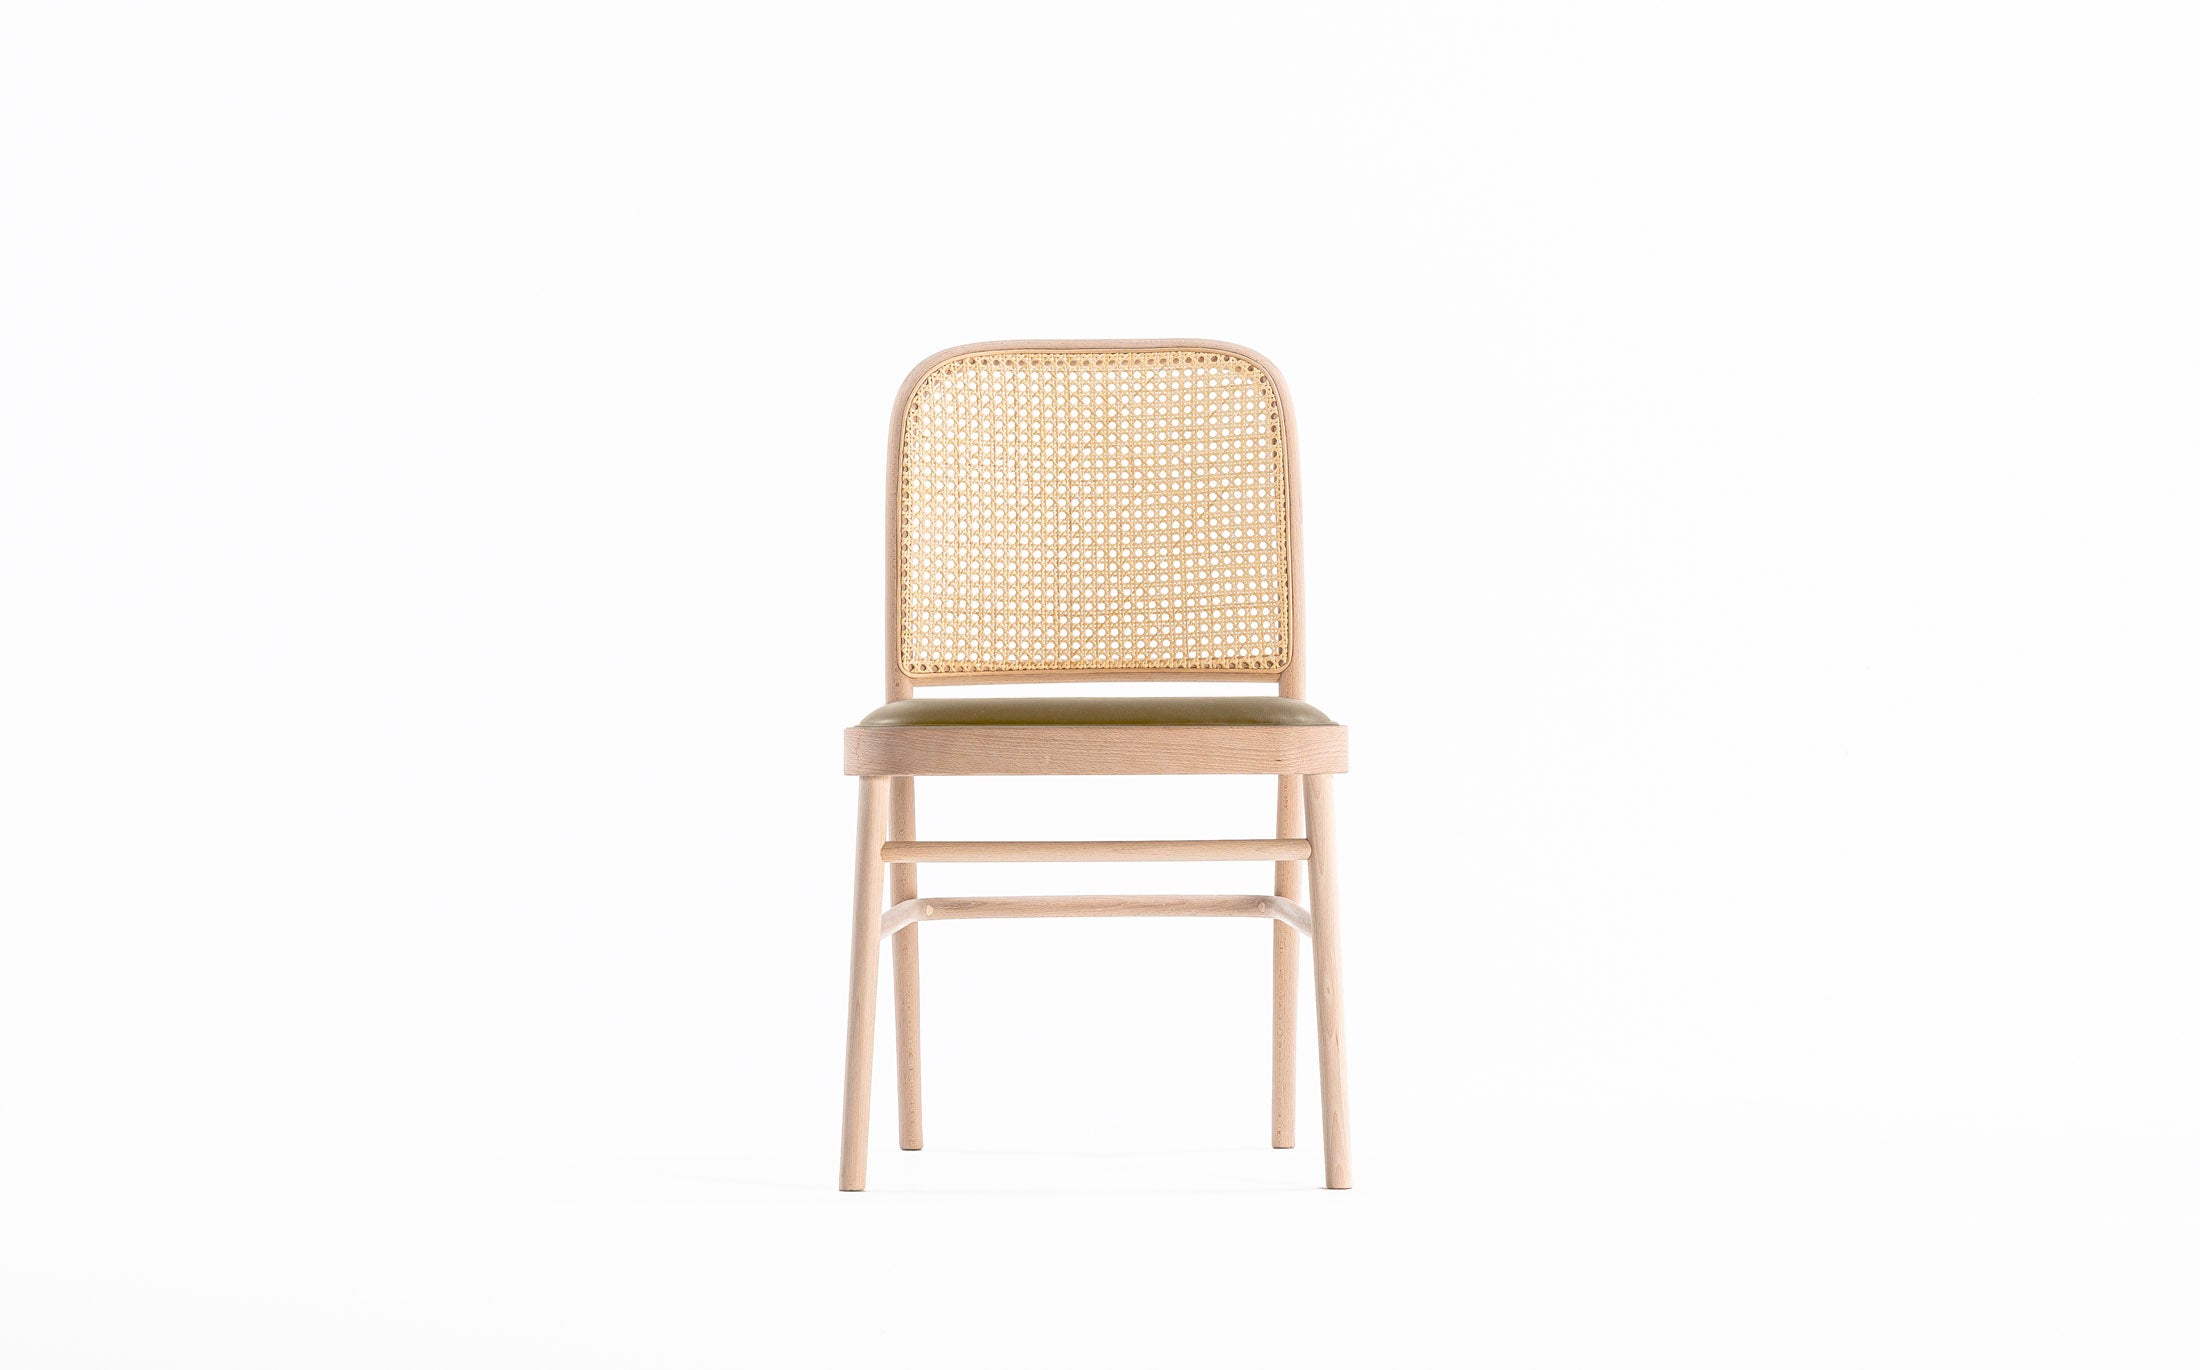 The bent chair #Seat materials_smooth leather 40108